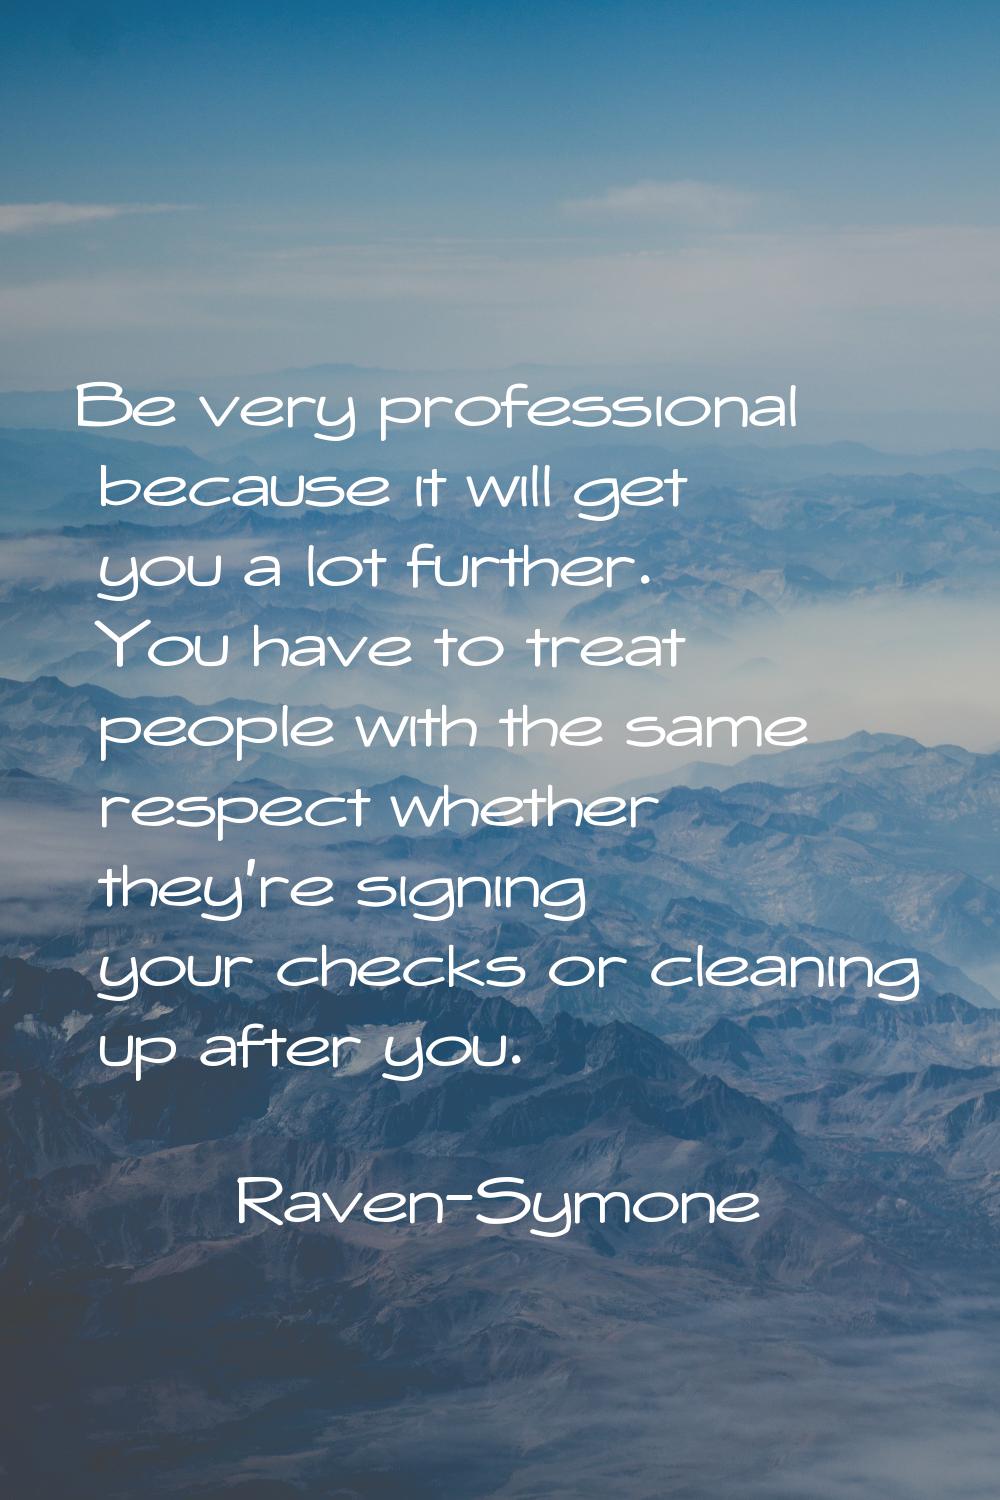 Be very professional because it will get you a lot further. You have to treat people with the same 